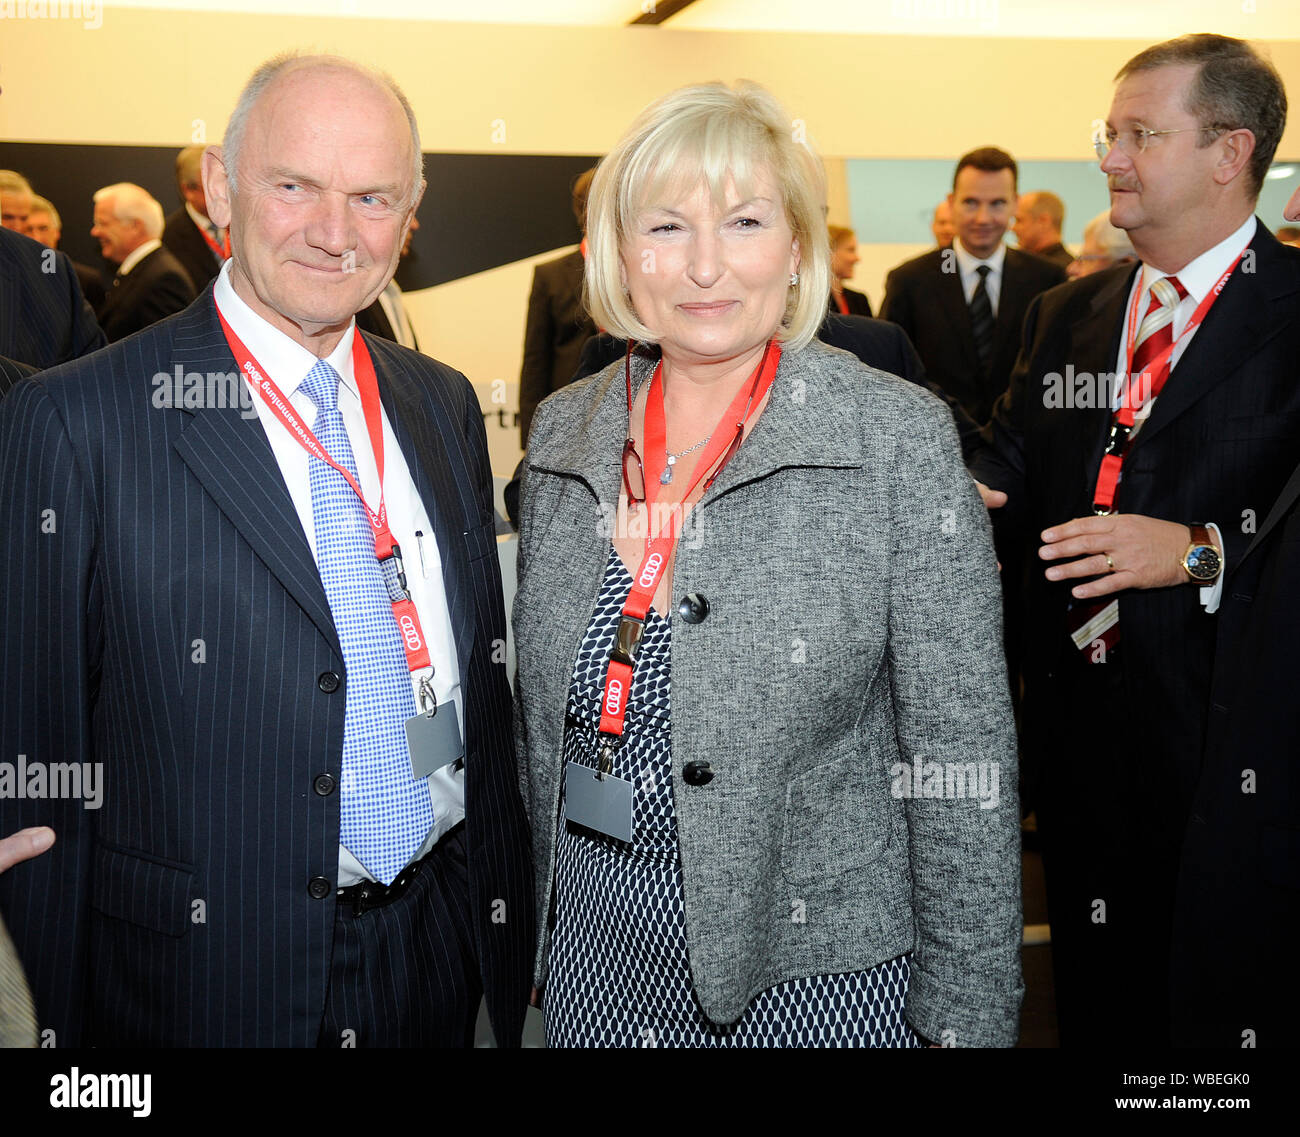 Ingolstadt. 7th May, 2008. Ferdinand PIECH died at the age of 82 years. Archive photo: v.li:Prof.Dr. Ing. Ferdinand K.PIECH with wife Ursula, Dr.Ing. Wendelin WIEDEKING, Management Chairman Porsche. Audi Annual General Meeting on May 7, 2008 in Ingolstadt.Automobilwirtschaft. | usage worldwide Credit: dpa/Alamy Live News Stock Photo